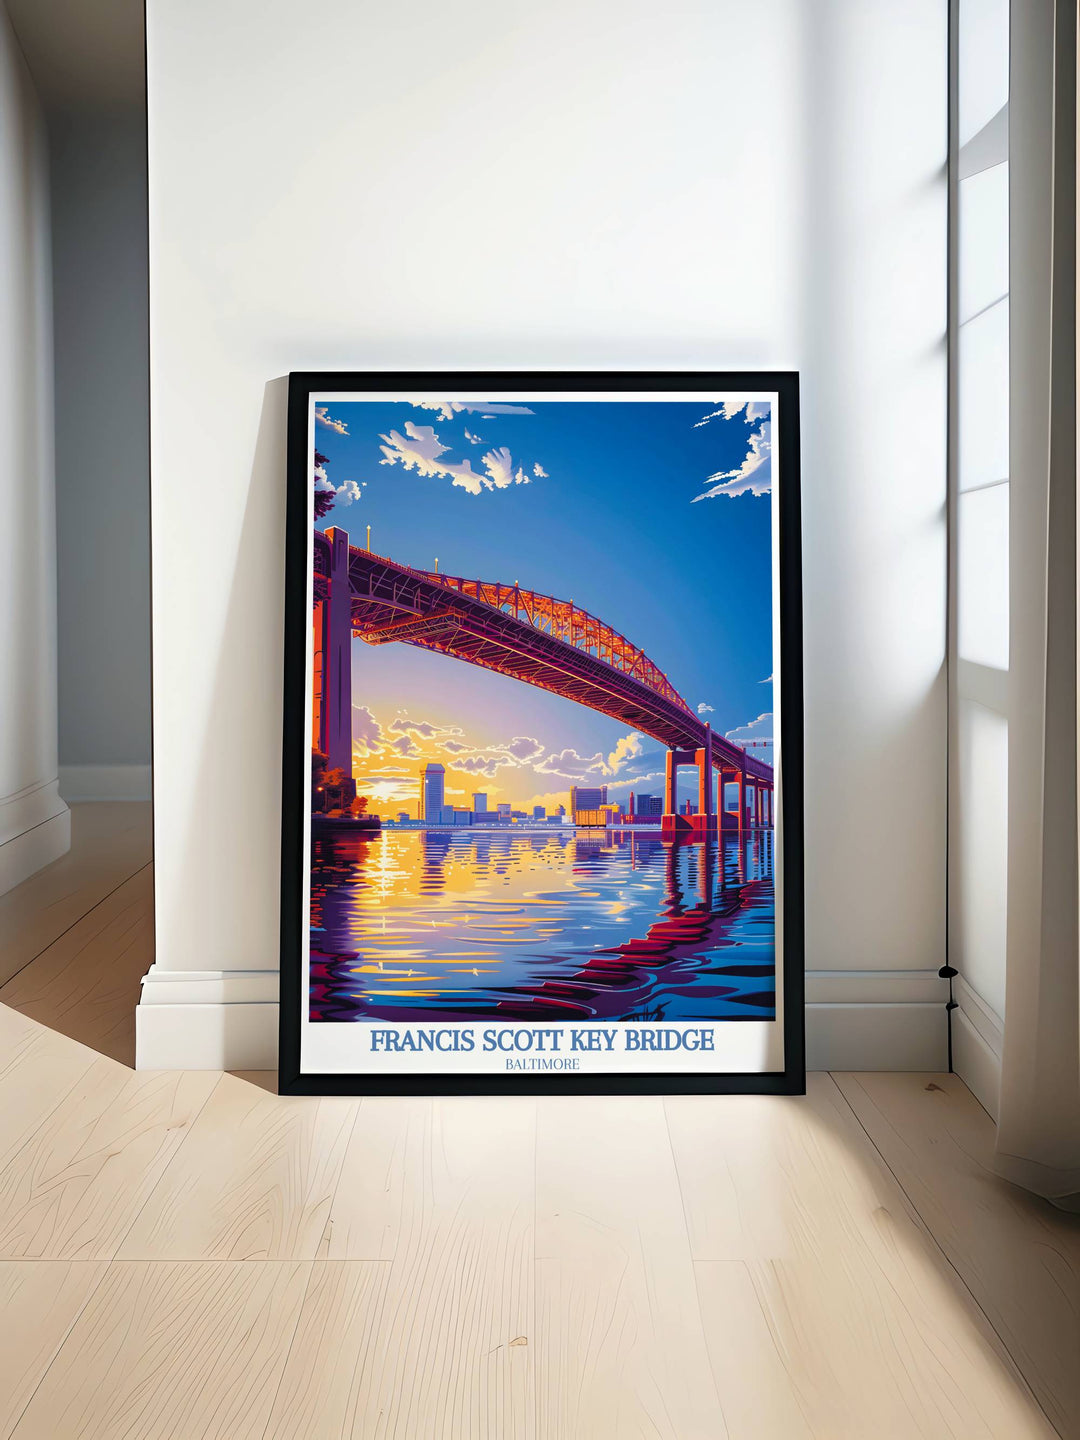 Digital art print of the Francis Scott Key Bridge at sunset with vivid orange skies, perfect for Maryland travel enthusiasts looking for a vibrant wall decor.